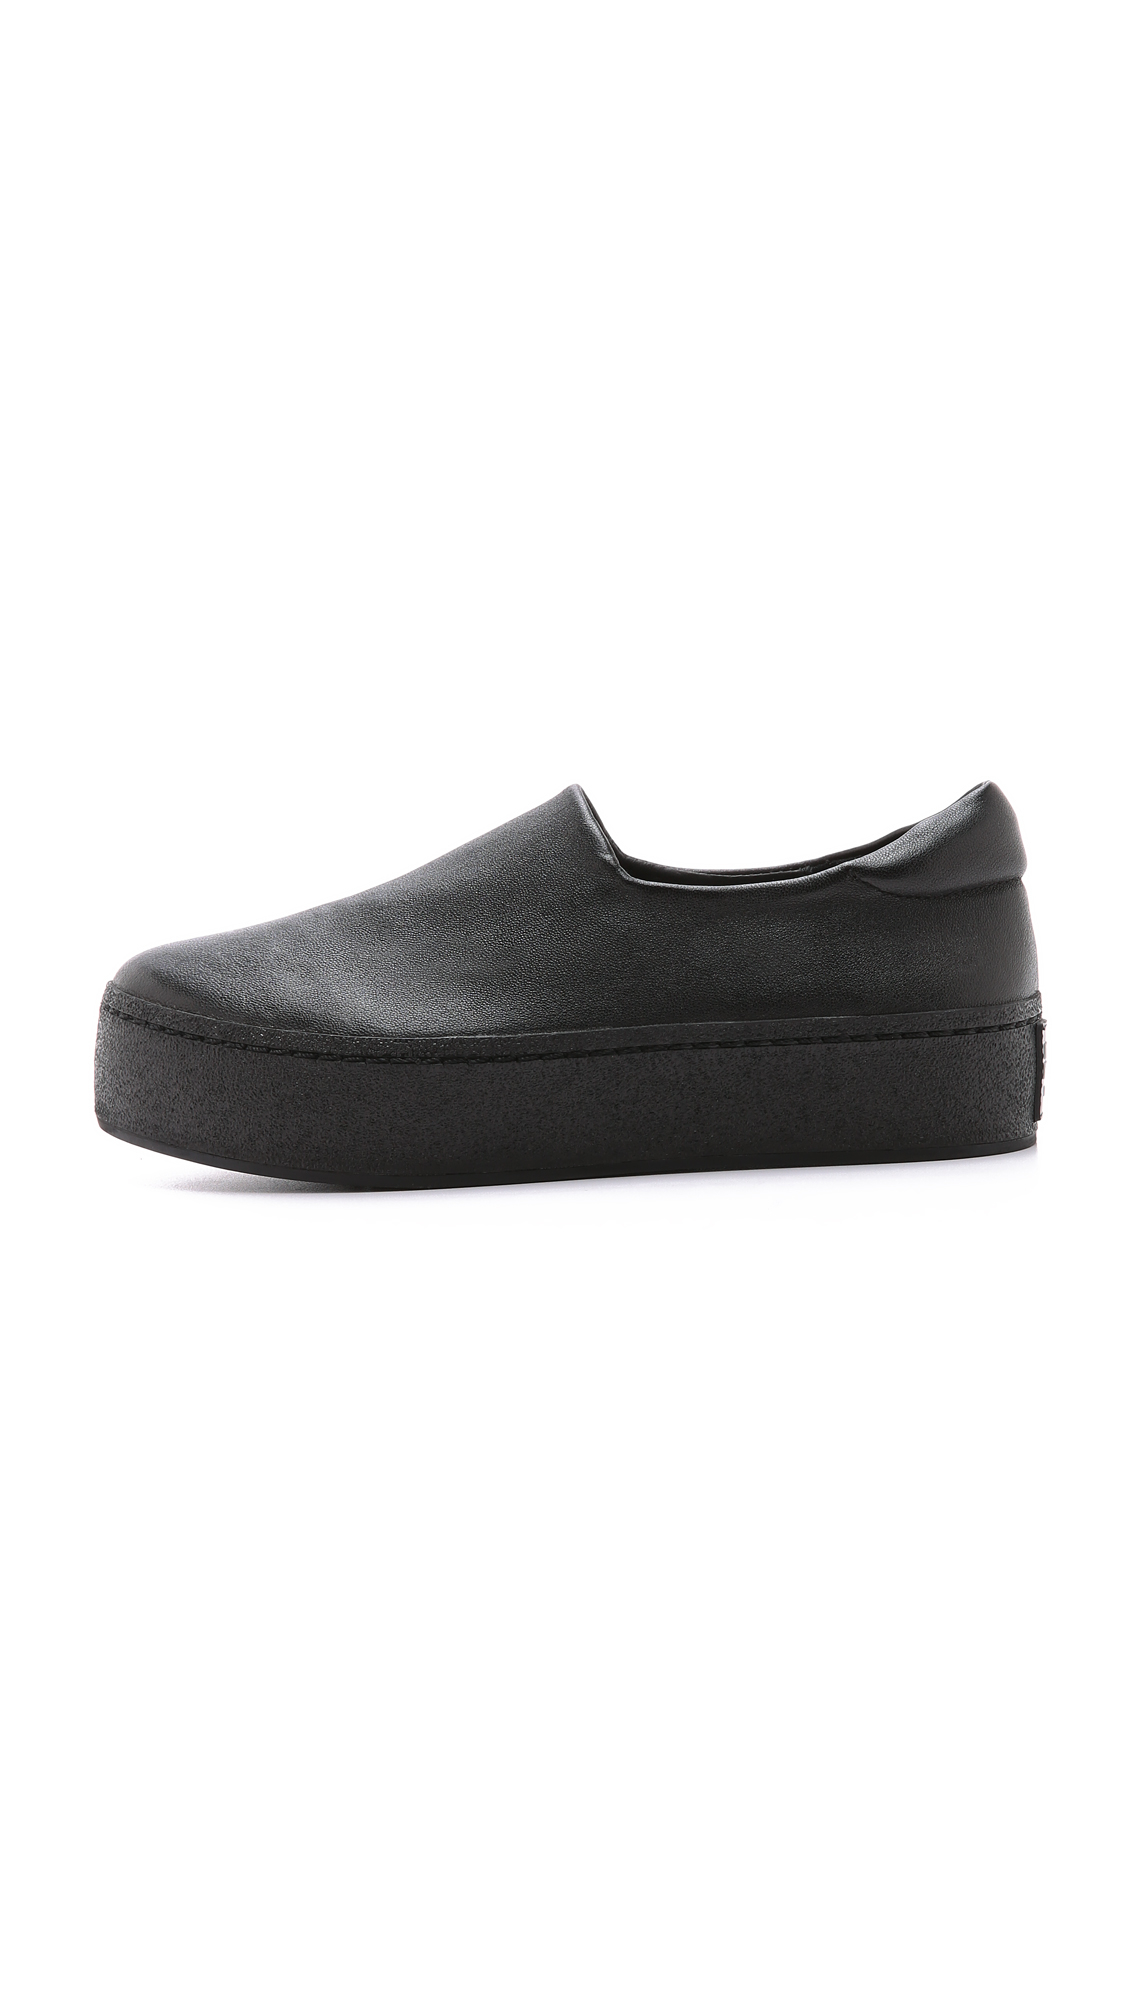 Opening Ceremony Cici Slip On Leather Platform Sneakers in Black | Lyst